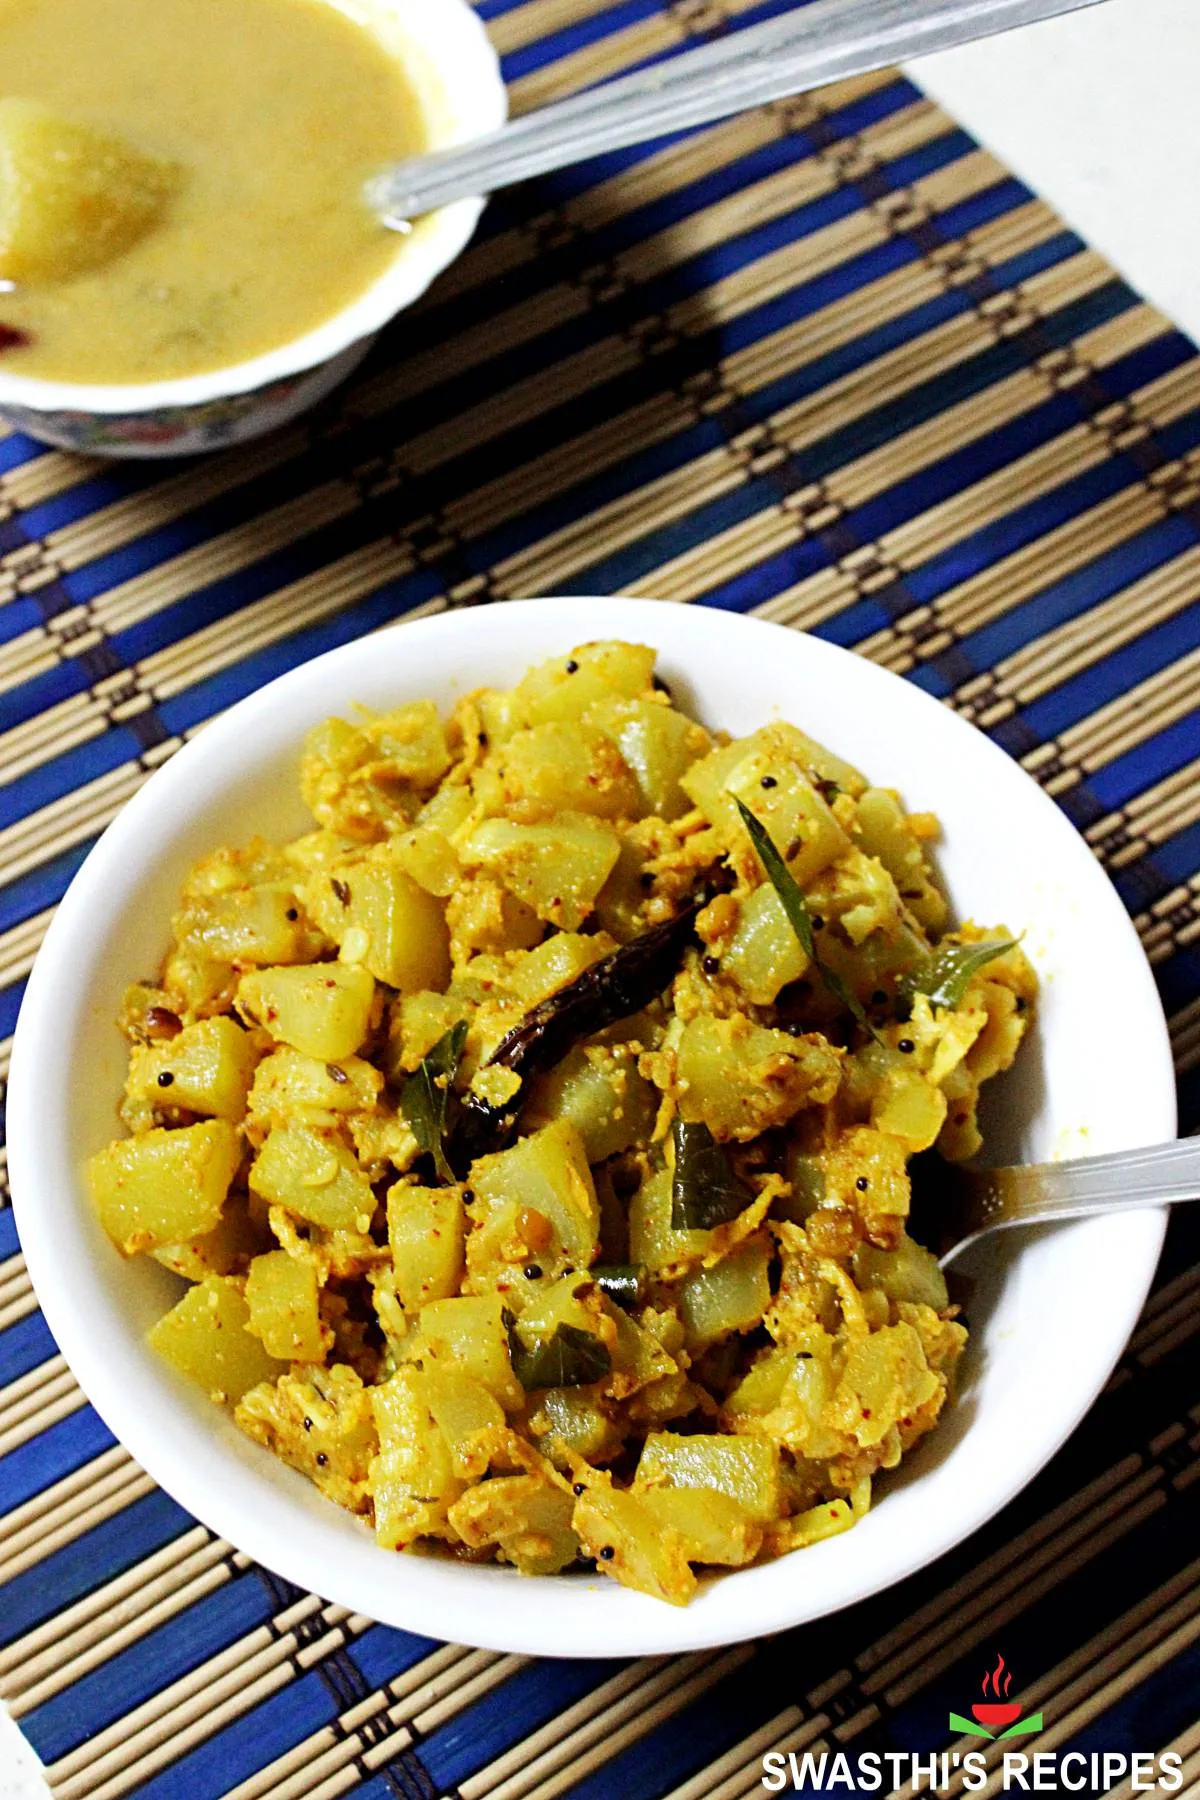 Bottle gourd curry made with gourd spices and herbs